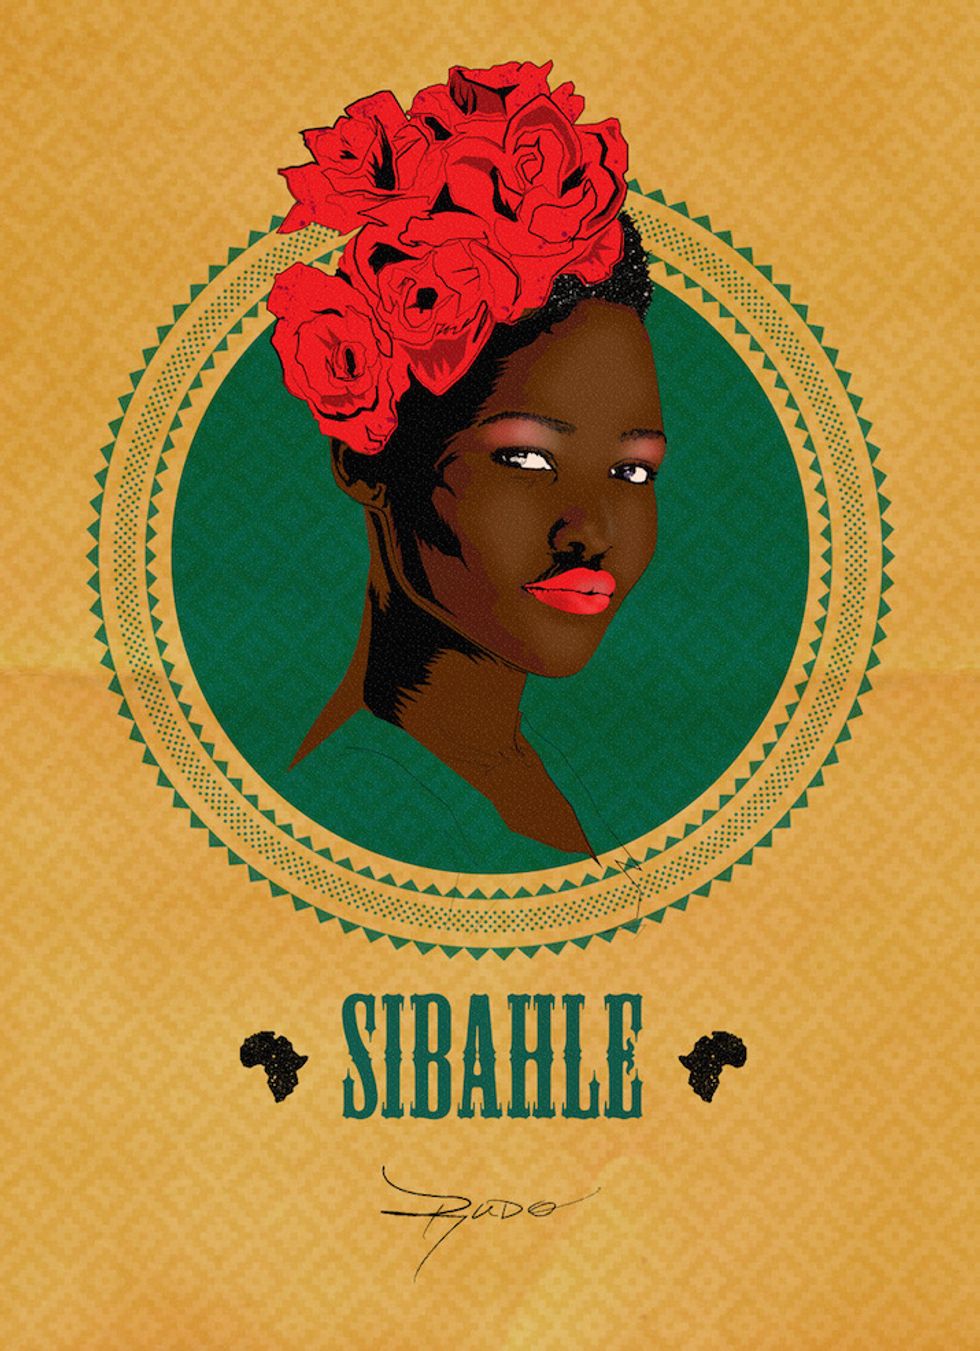 Phenomenal African Women Celebrated In Posters For Women's Day